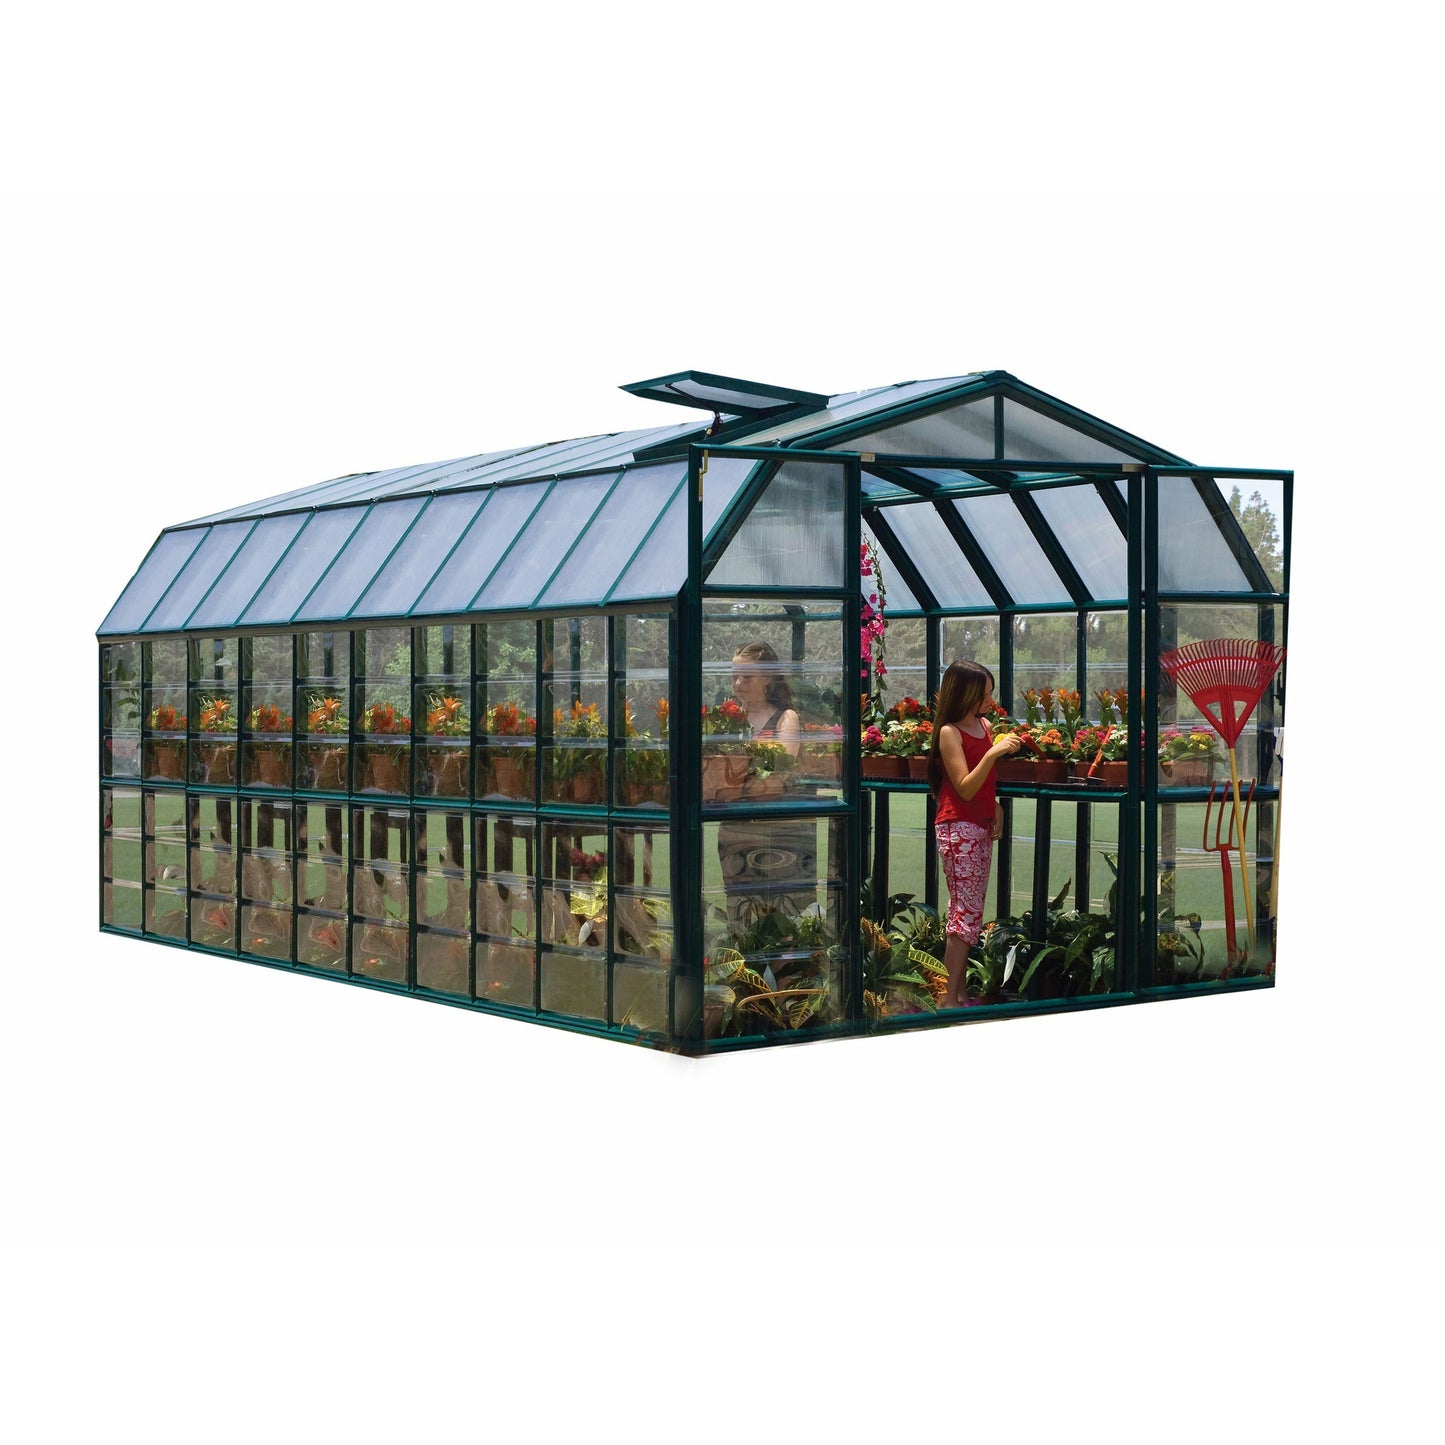 Rion Grand Gardener 8' x 20' Greenhouse - Clear